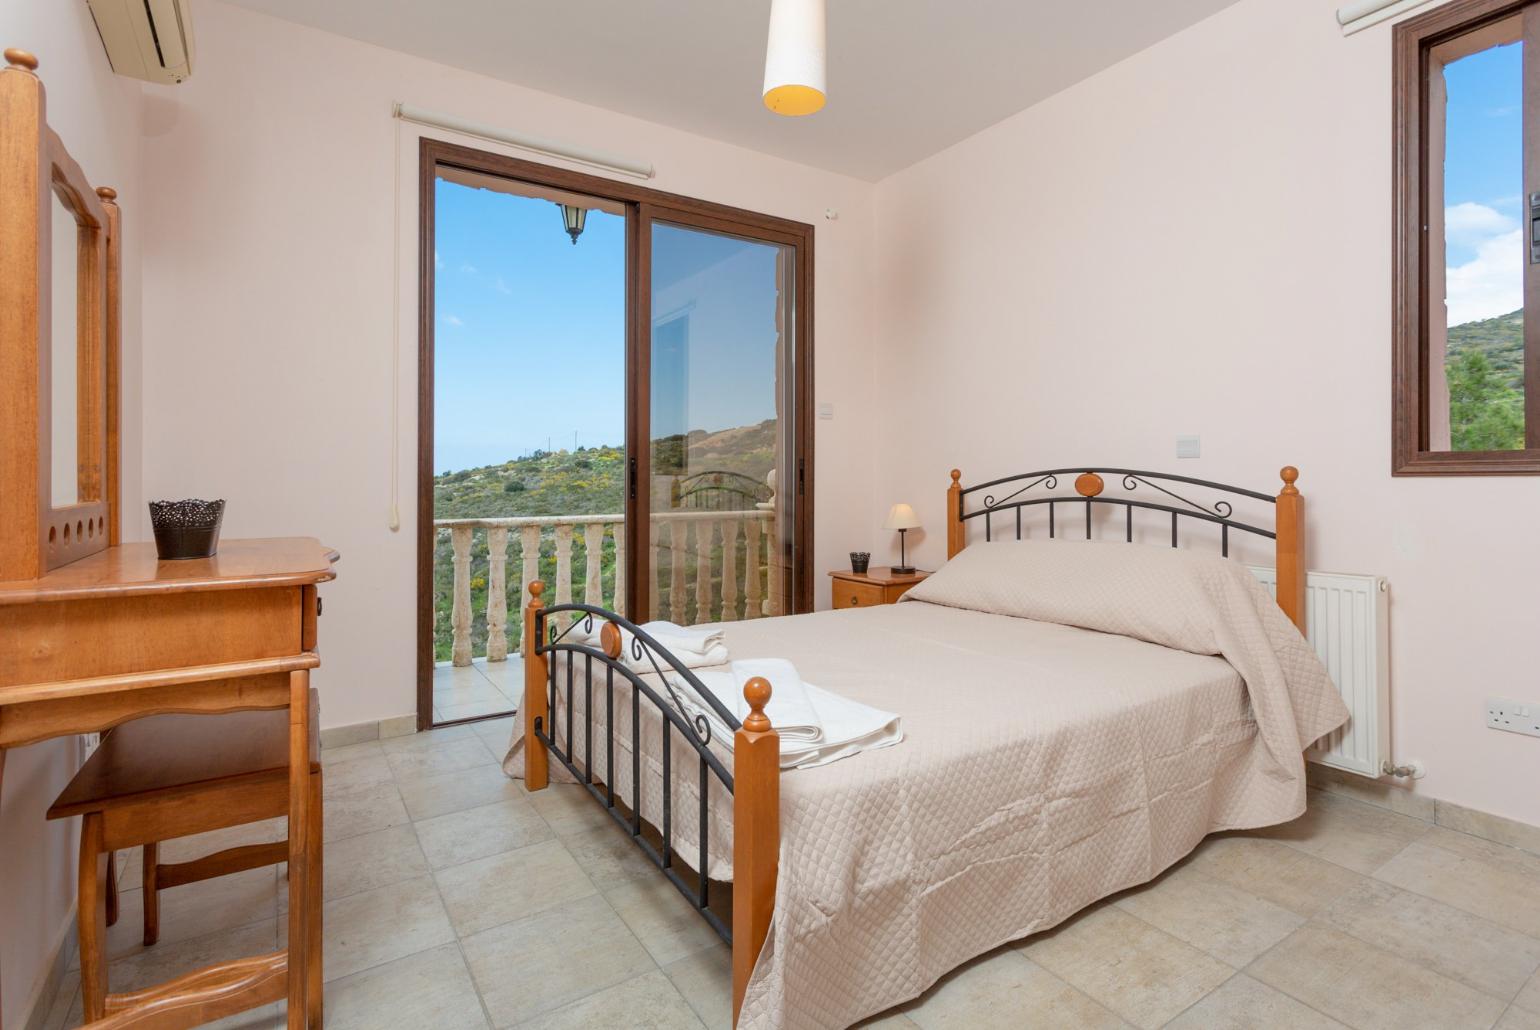 Double bedroom with en suite bathroom, A/C, and balcony access with views of sea and countryside